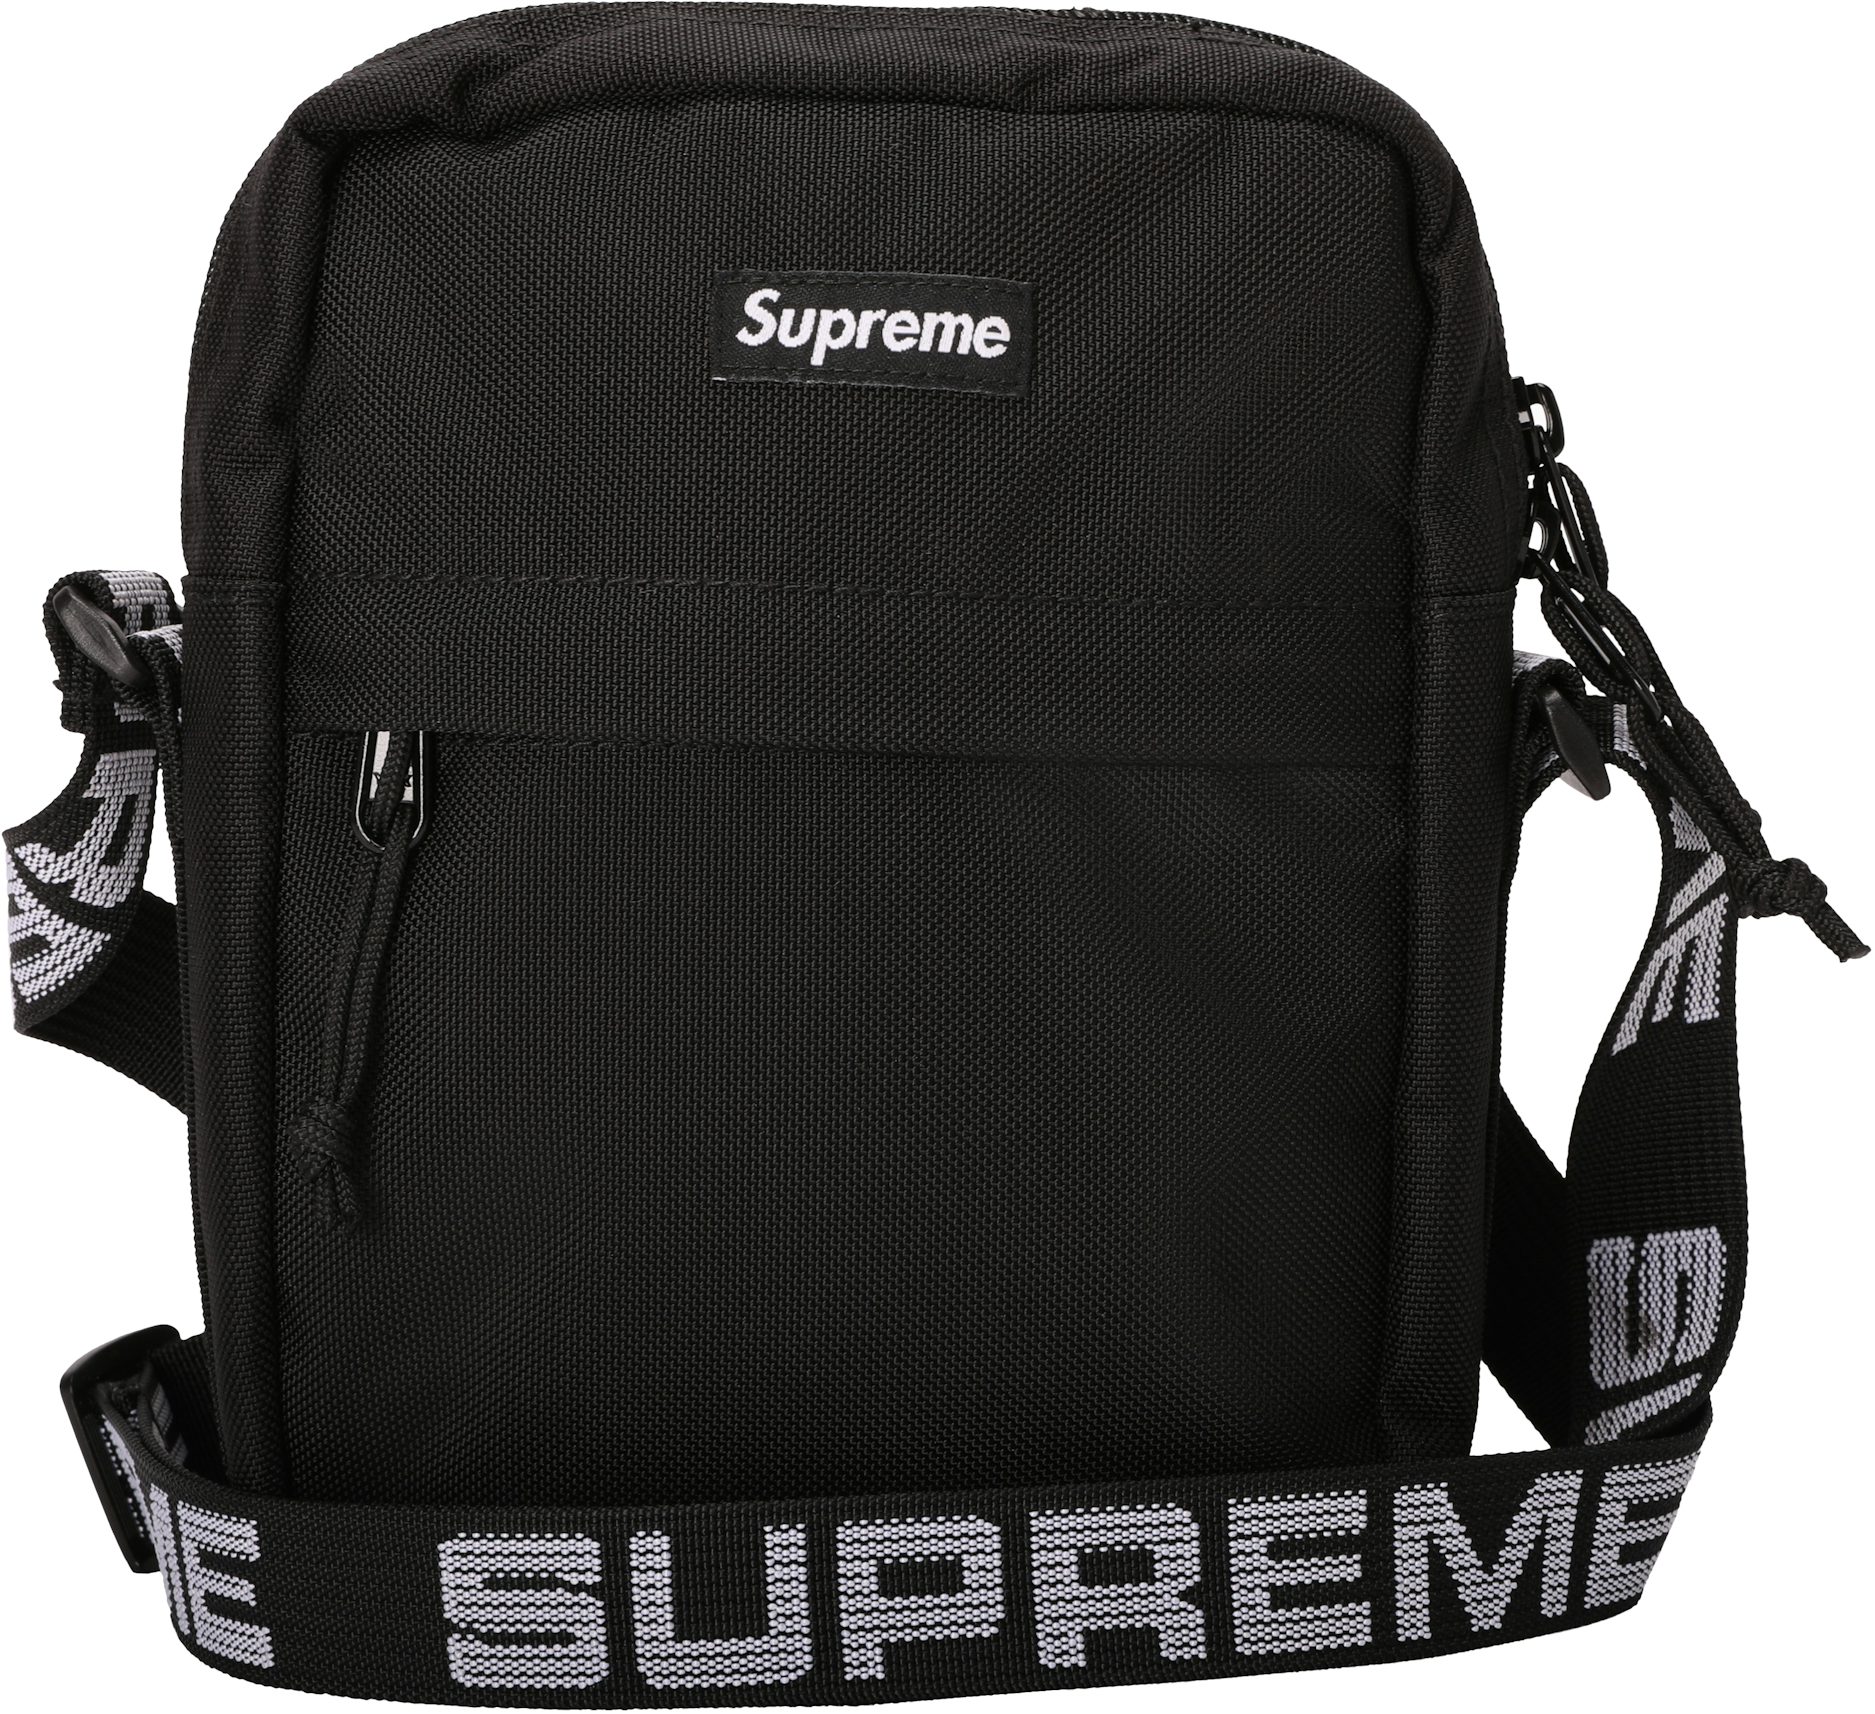 BRAND NEW BLUE SUPREME BAG AUTHENTIC NEW WITH TAGS